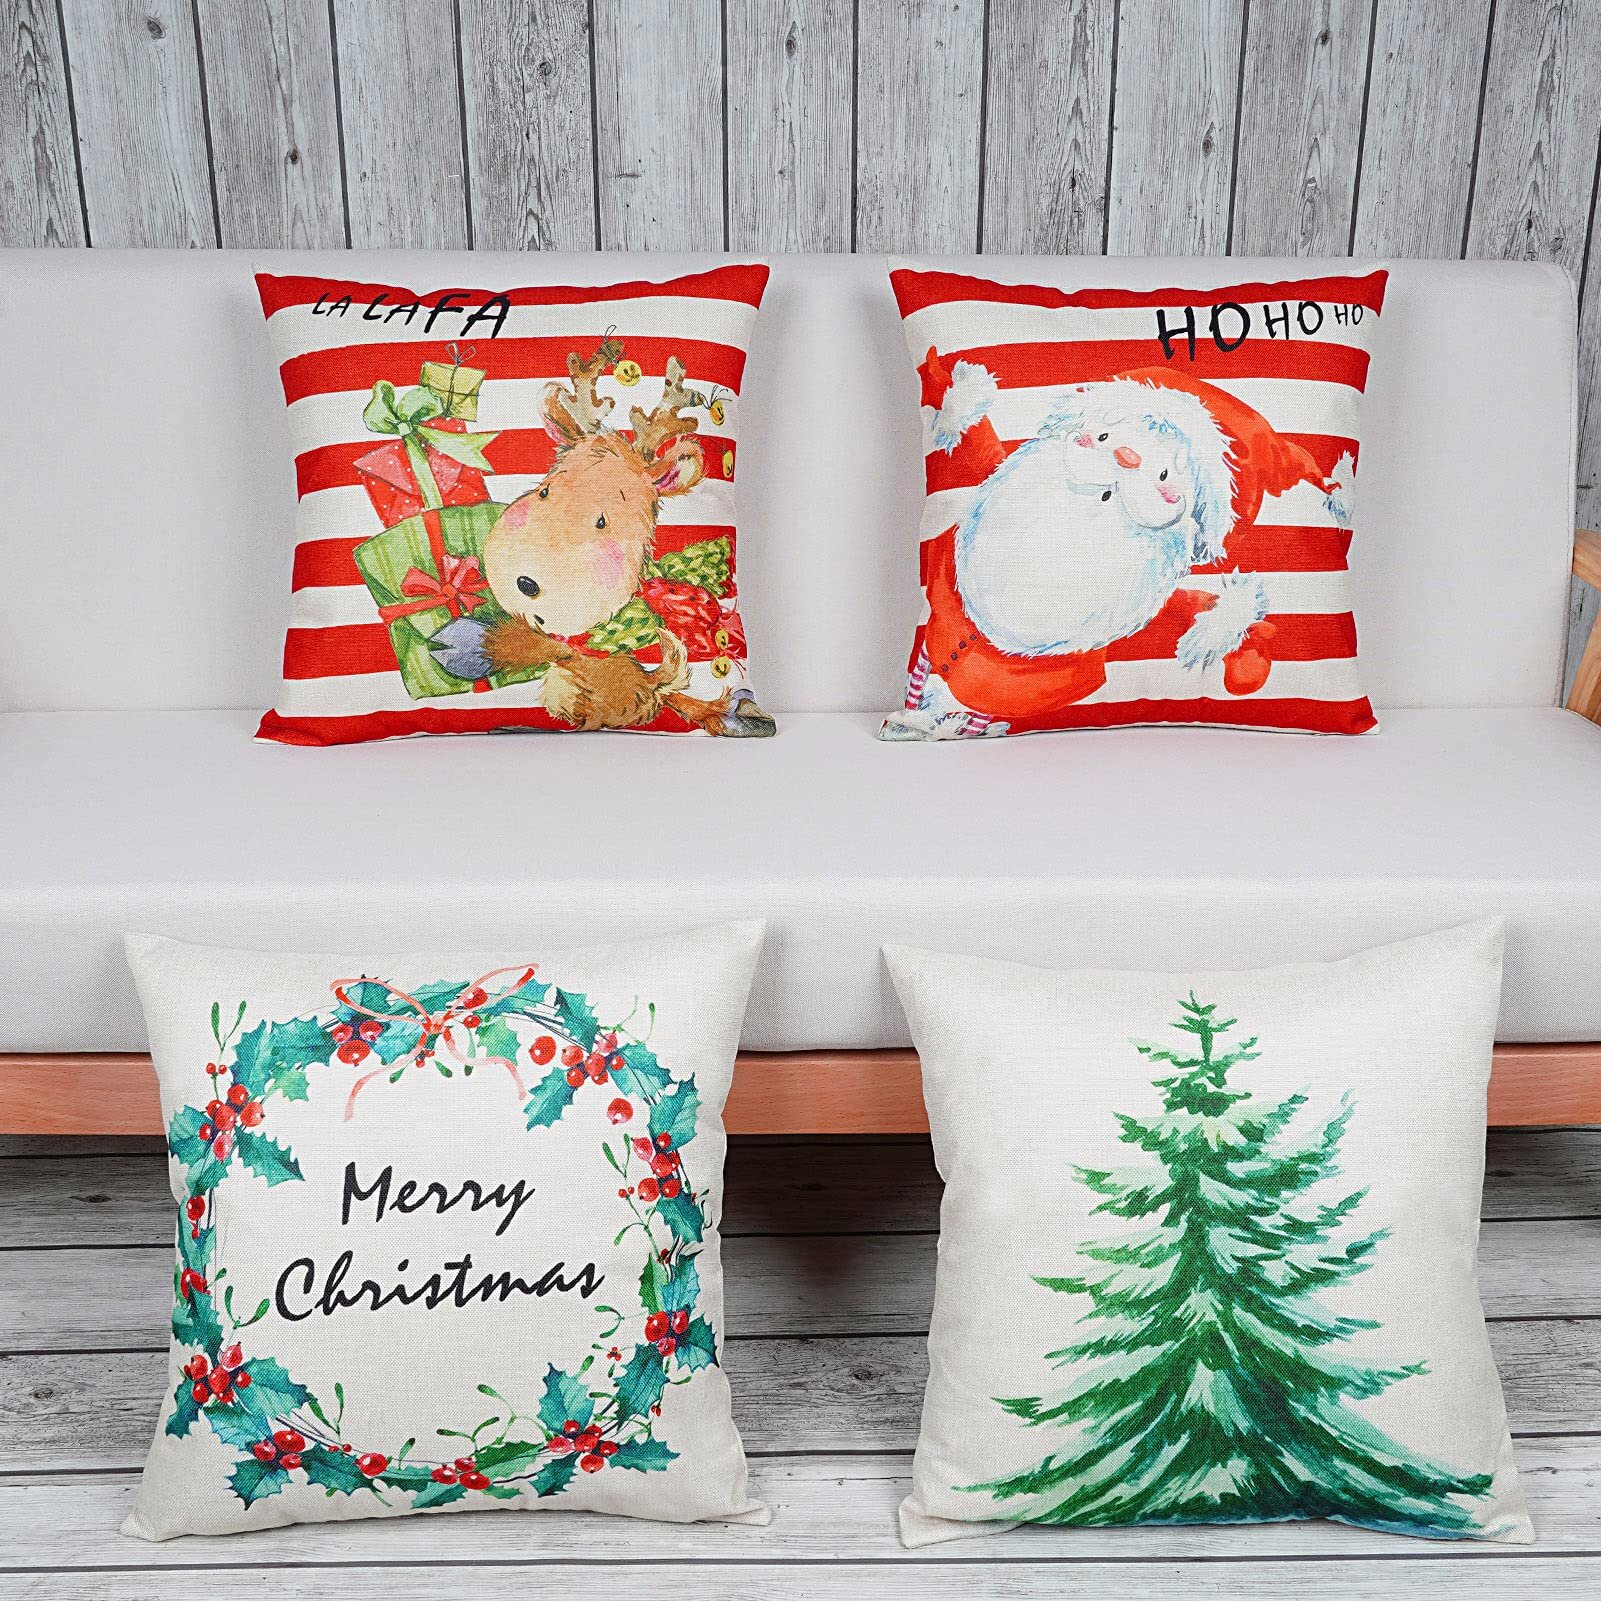 Blue, White Christmas Pillow Covers Farmhouse Christmas Decorations Cushion Case 18x18 Inches Set of 4 Rustic Winter Holiday Throw Pillows for Sofa Couch Linen Decorations 